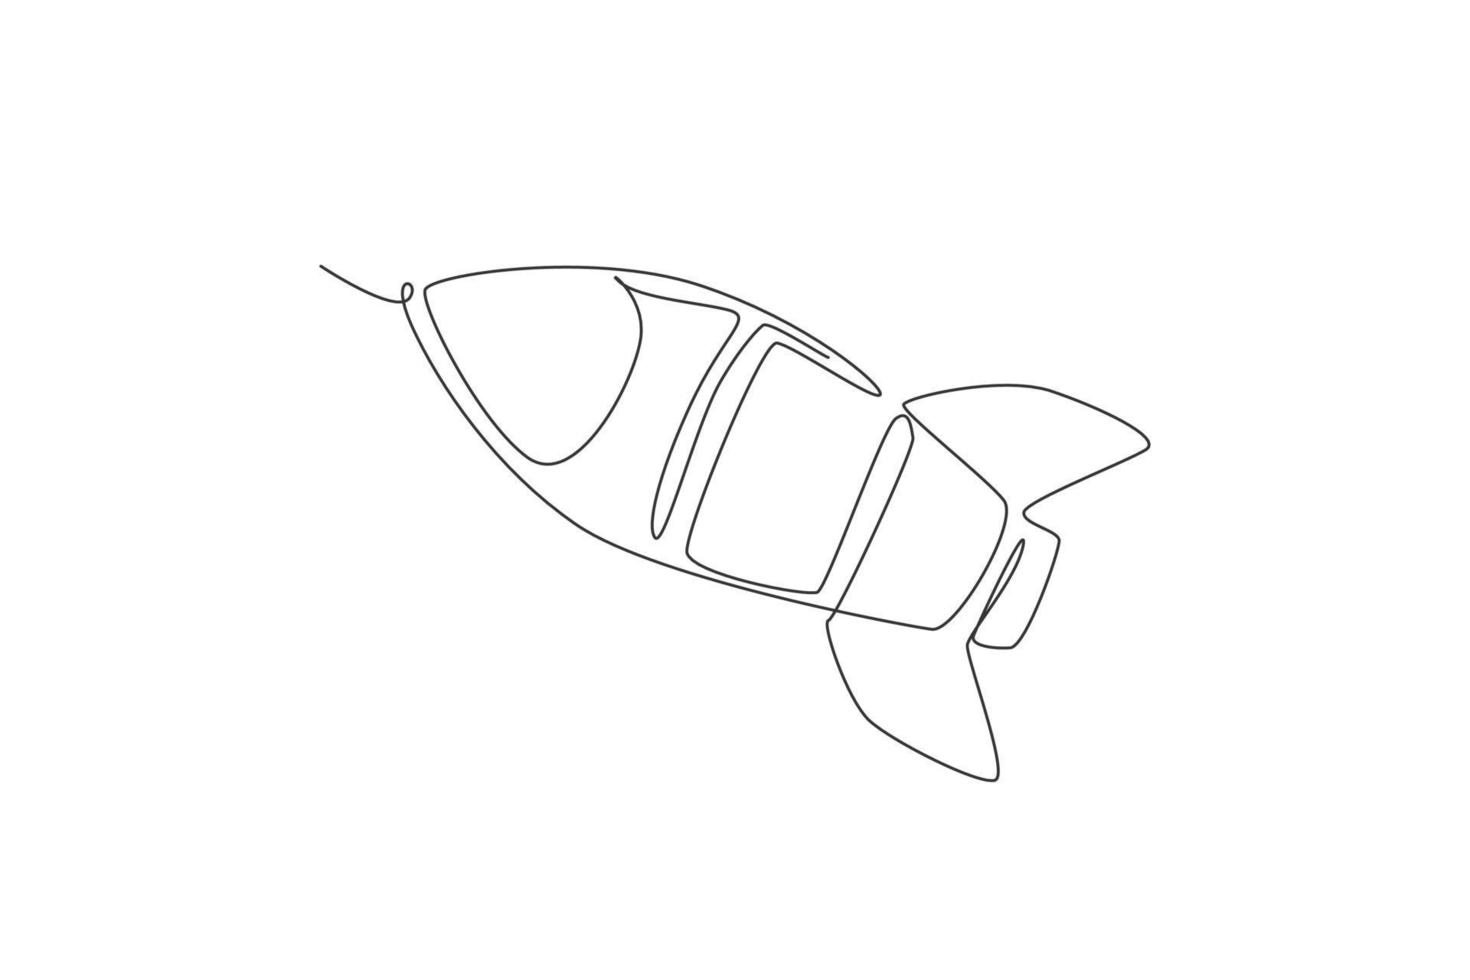 Single continuous line drawing rocket launch fly into the sky universe. Vintage spacecraft rocketship. Simple retro outer space vehicle concept. Trendy one line draw design vector illustration graphic